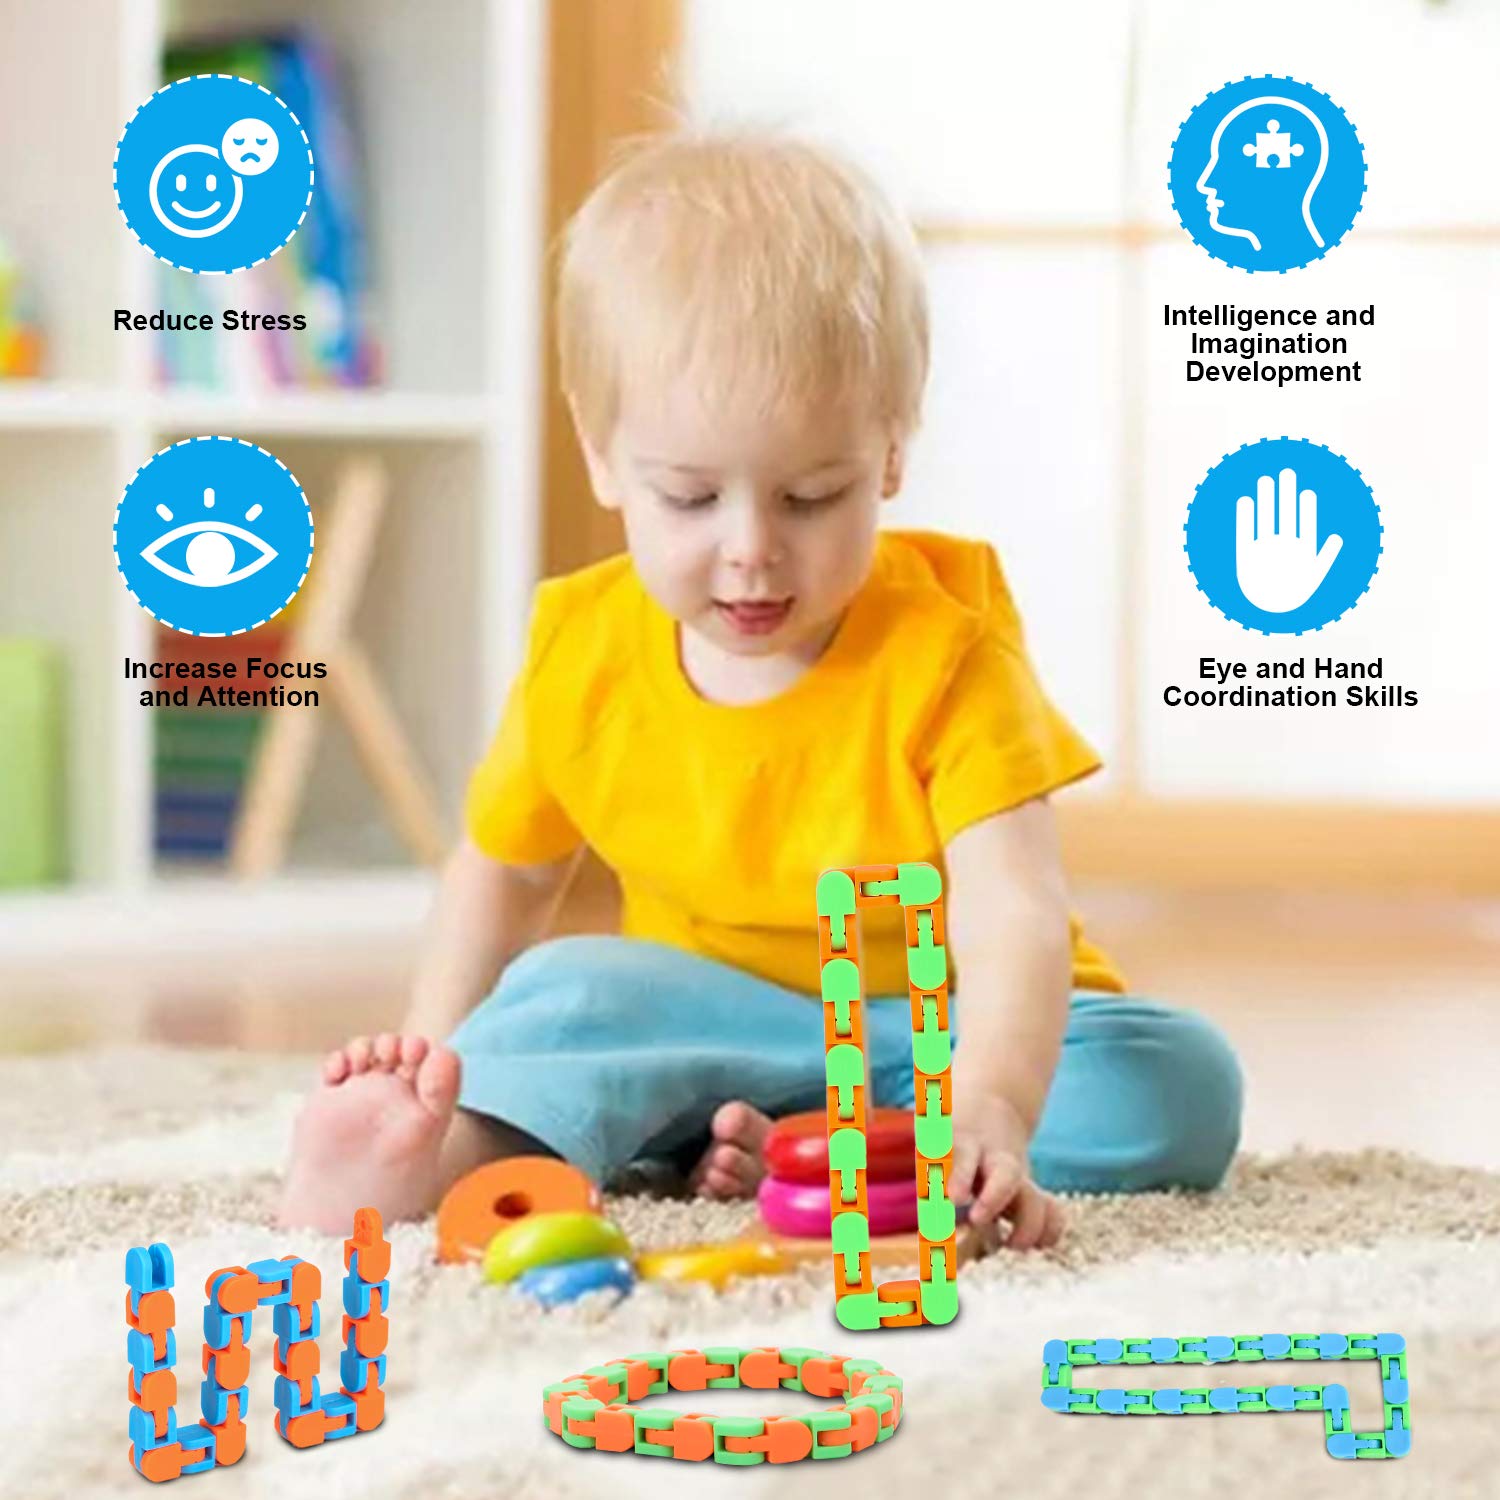 8Pcs Wacky Tracks Snap Fidget Click Toys for Kids Finger Sensory Snake Toys for Stress Relief ADD ADHD DIY Toys Autism Keeps Fingers Busy and Minds Focused